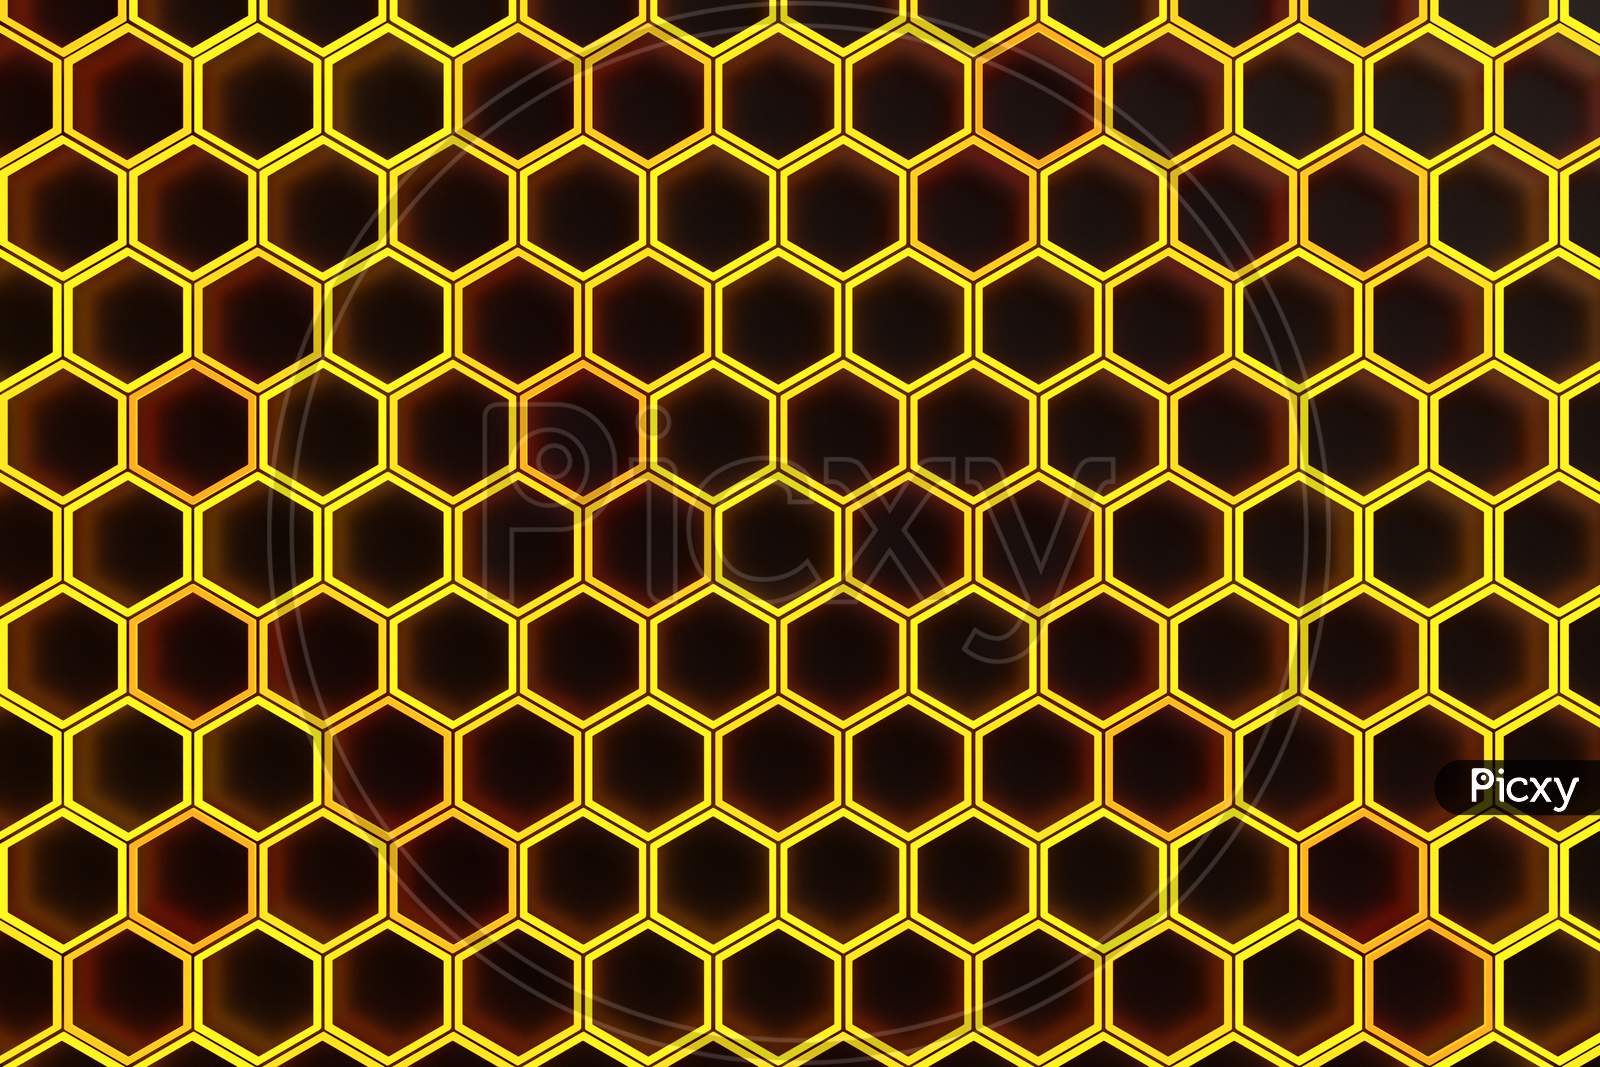 3D Illustration Of A Yellow Honeycomb Monochrome Honeycomb For Honey. Pattern Of Simple Geometric Hexagonal Shapes, Mosaic Background. Bee Honeycomb Concept, Beehive